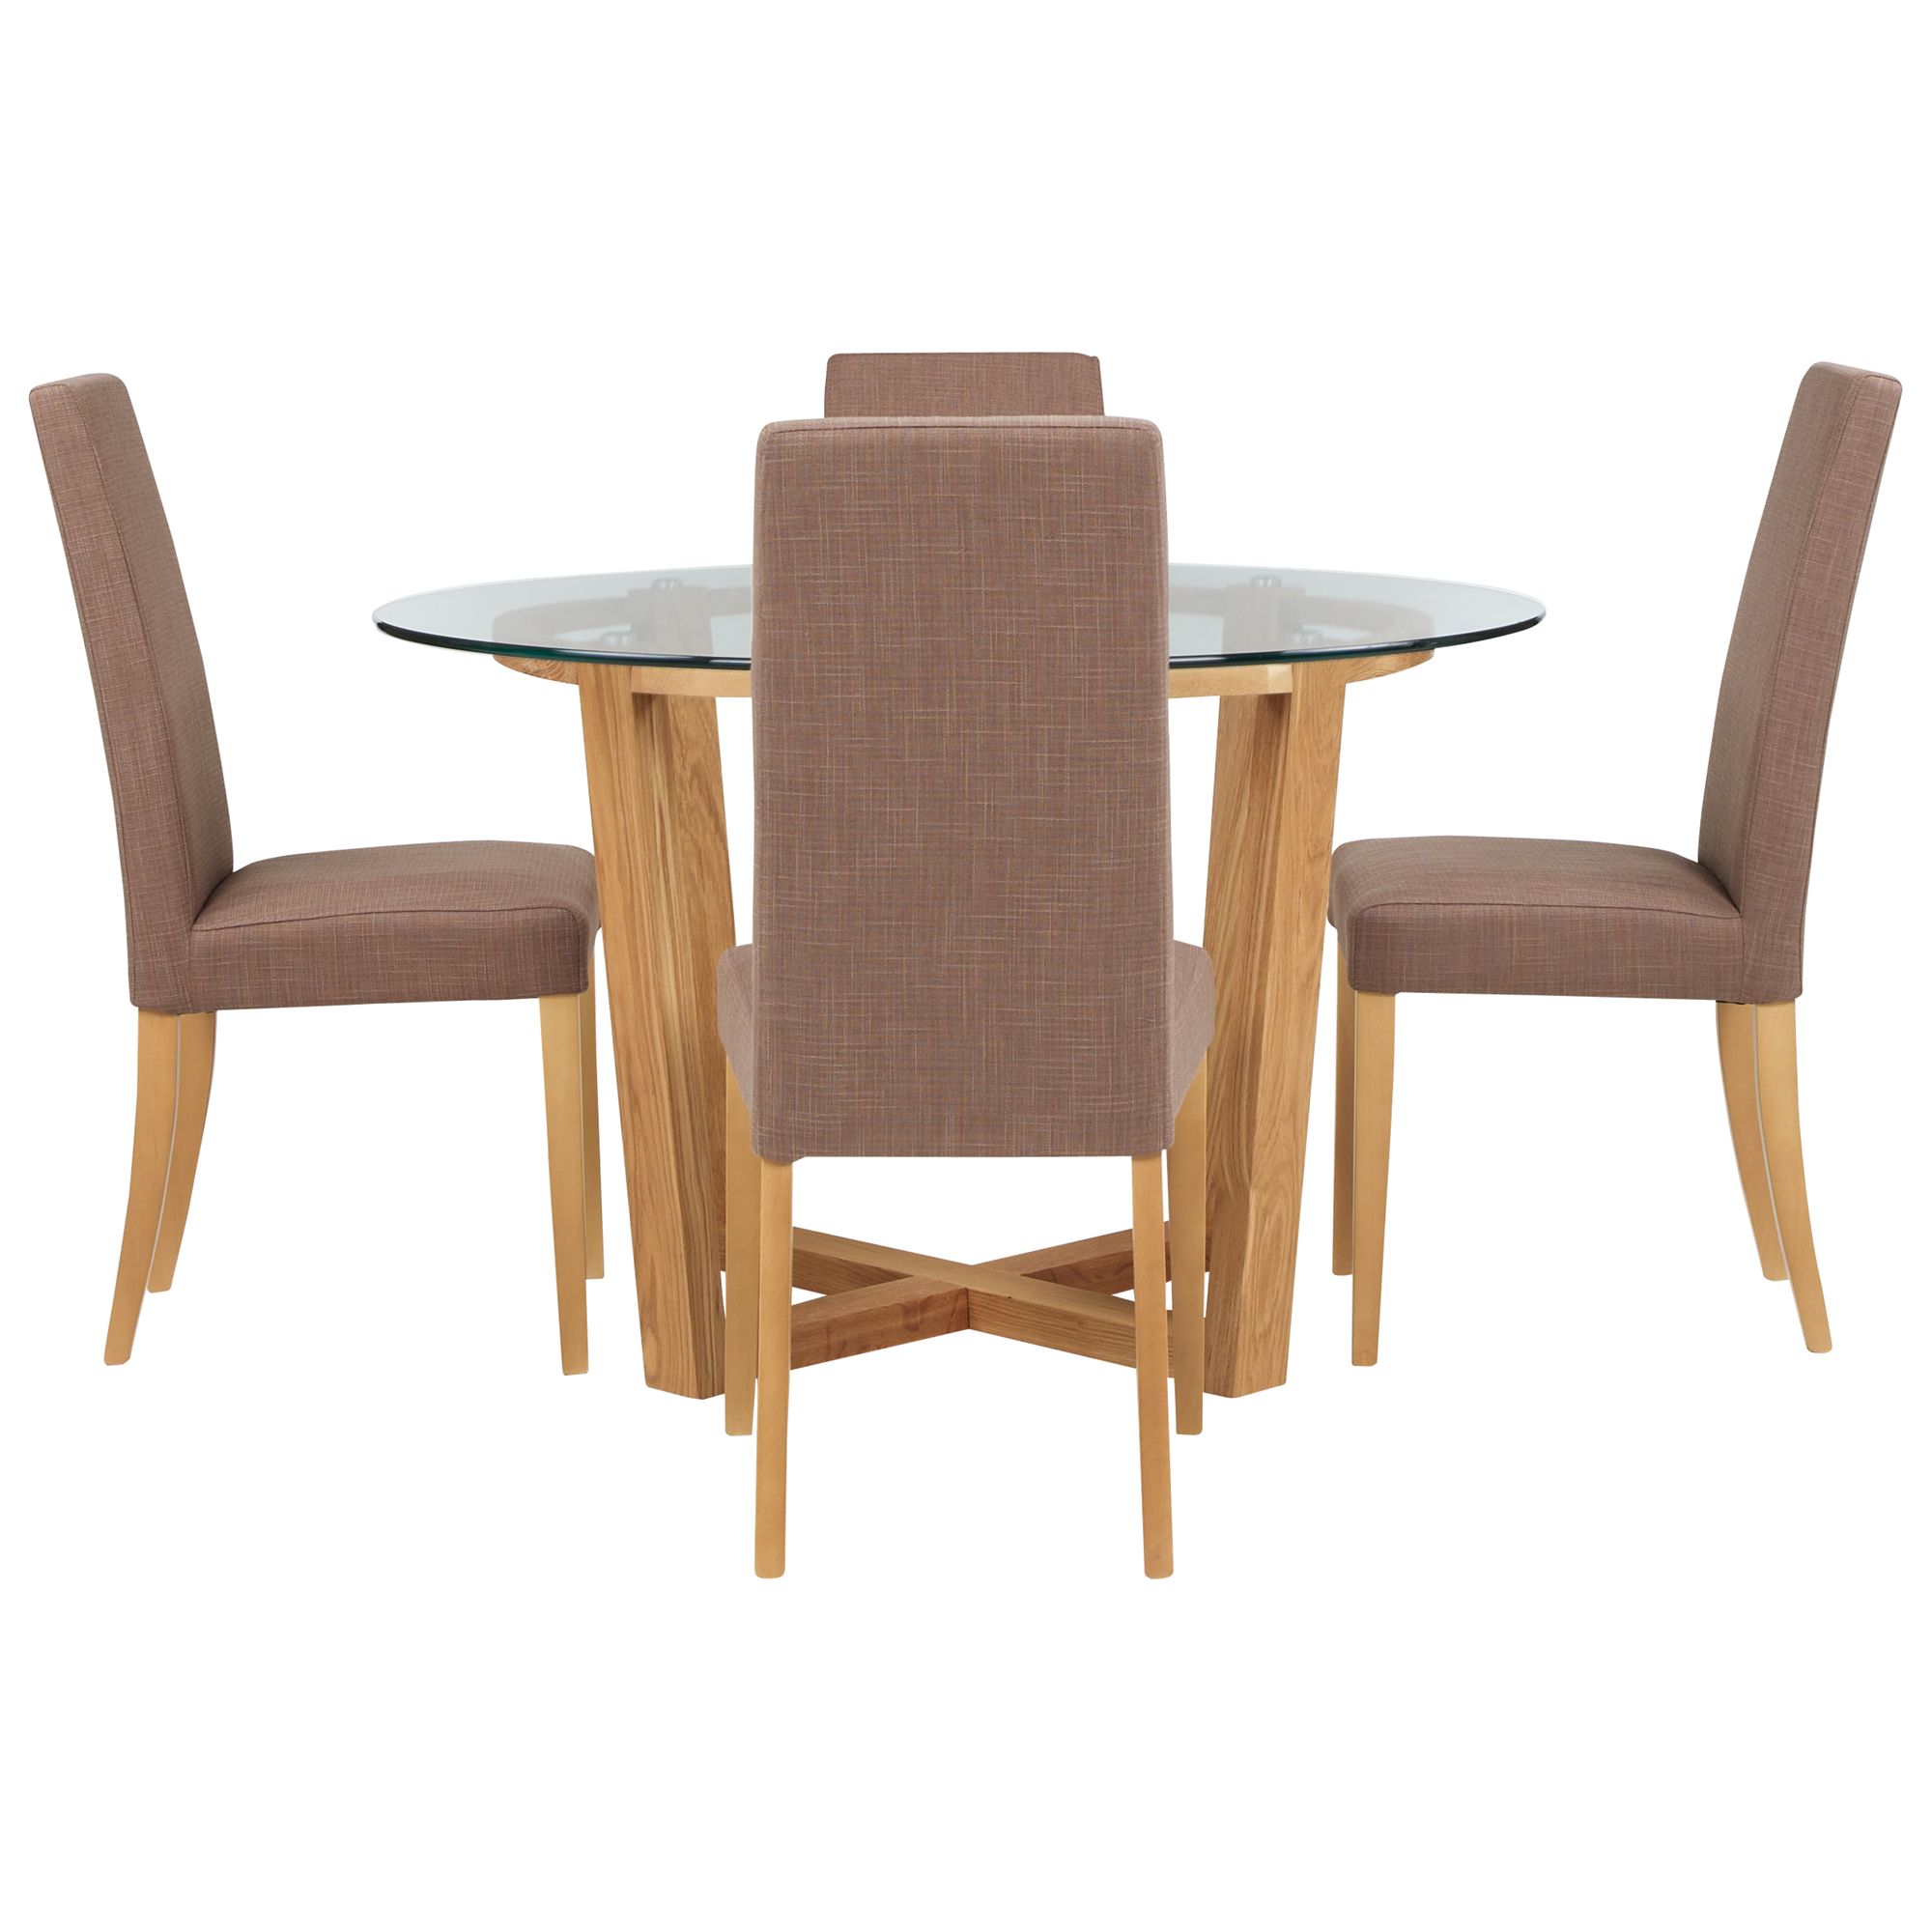 John Lewis Gene Round Dining Table and 4 Lydia Chairs in Mocha, width 120cm